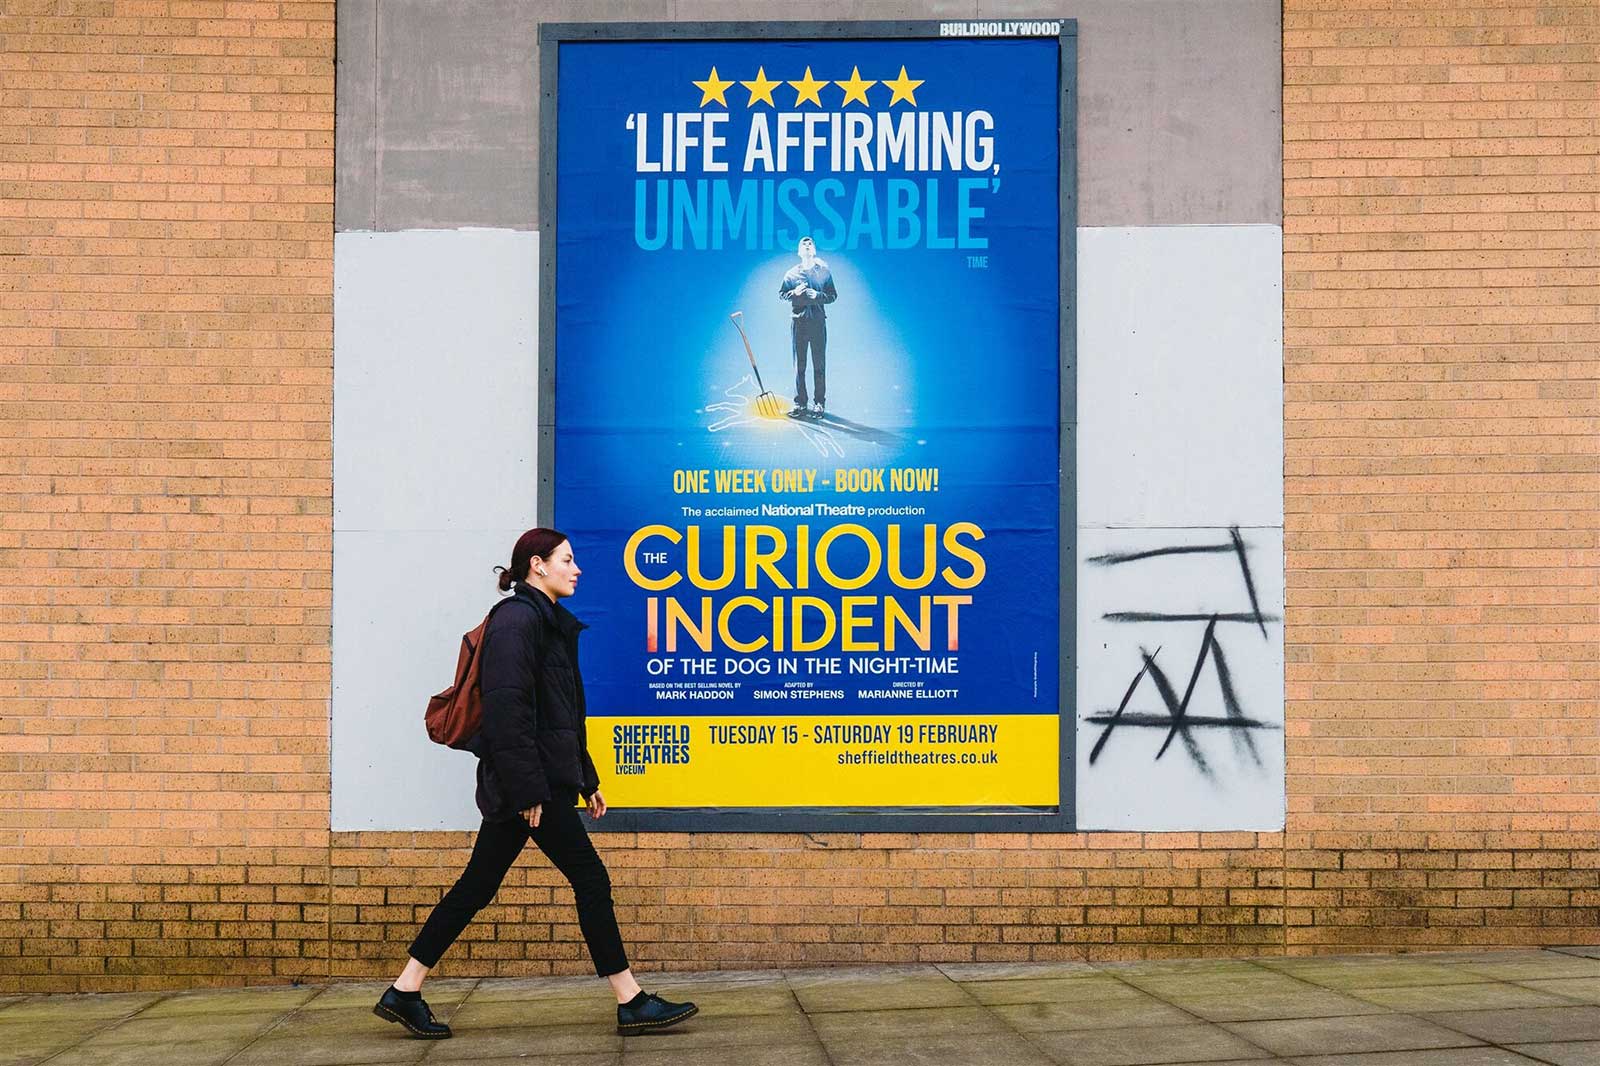 Sheffield Theatres: The Curious Incident of the Dog in the Night-Time